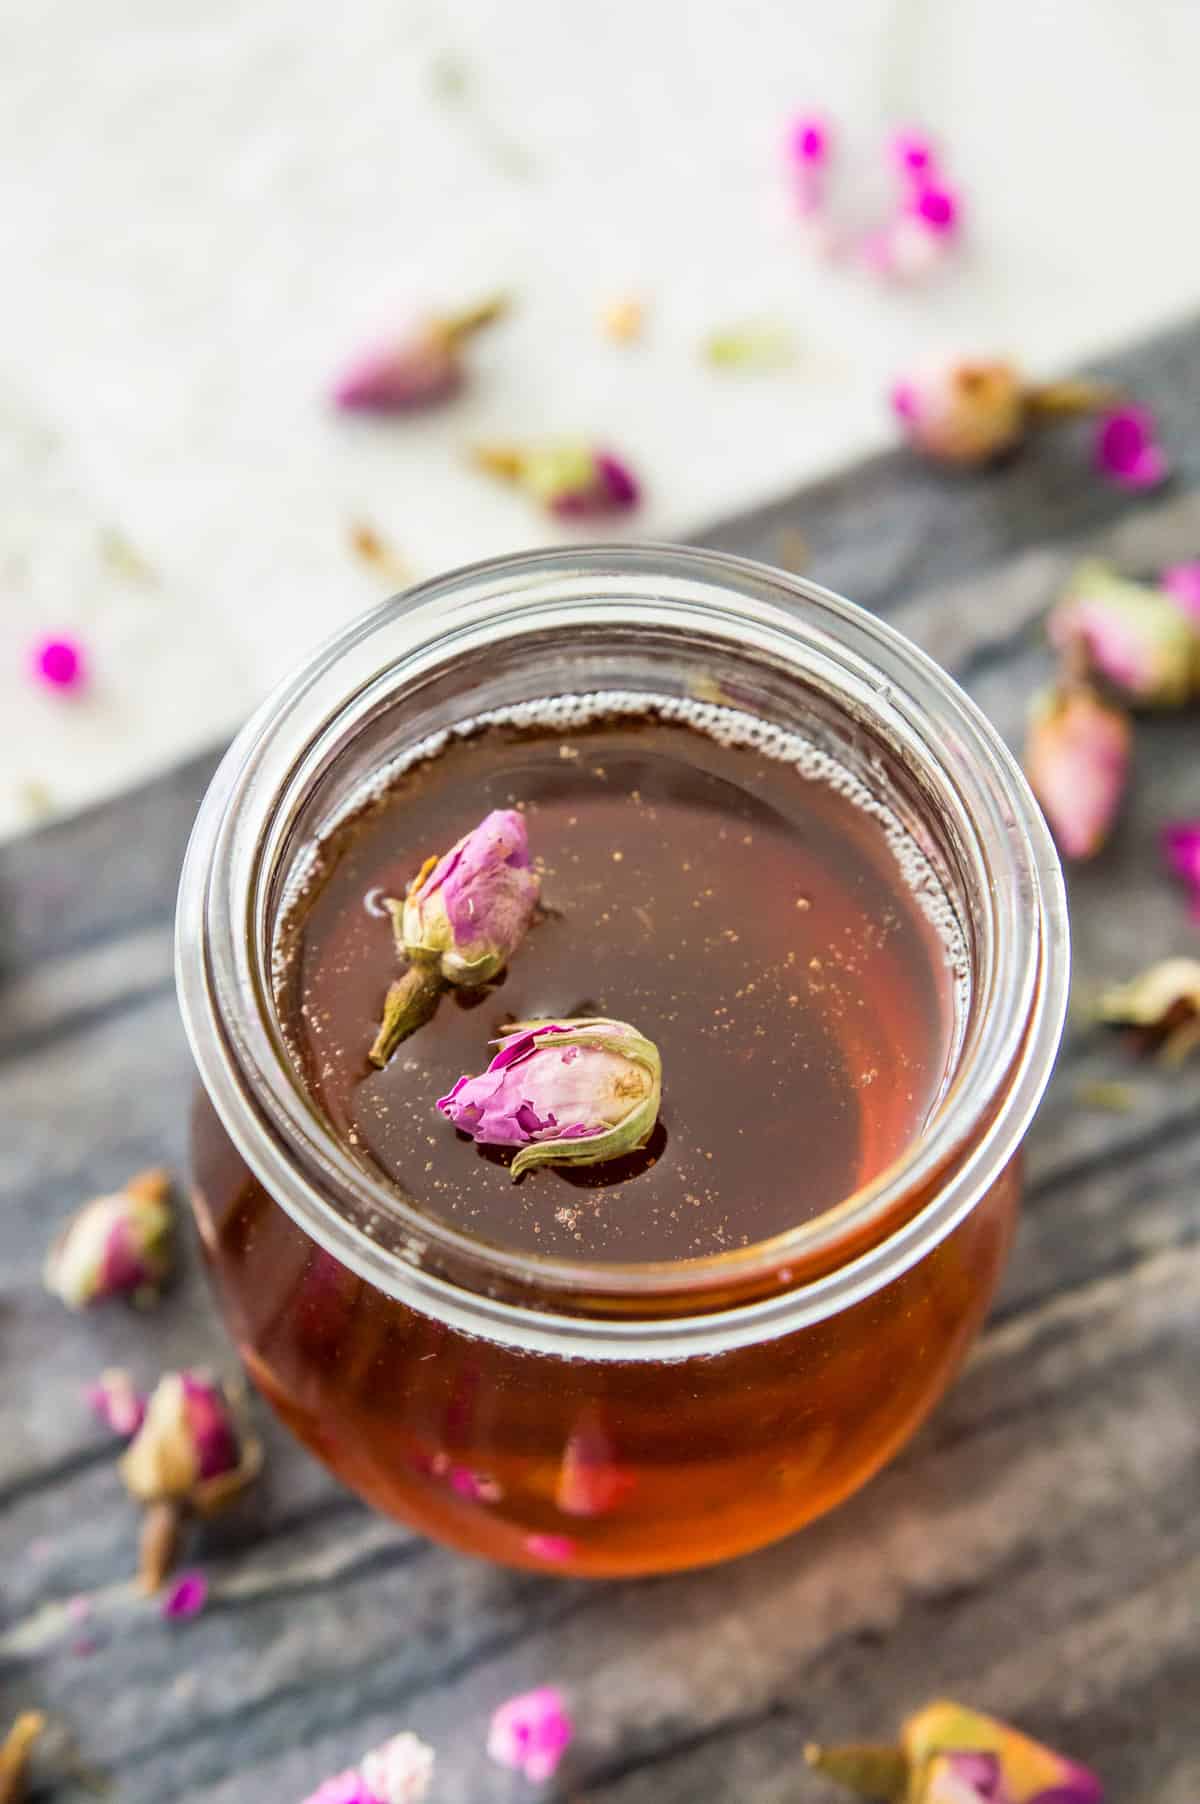 A glass jar filled with a rose simple syrup and topped with two dried rose buds.